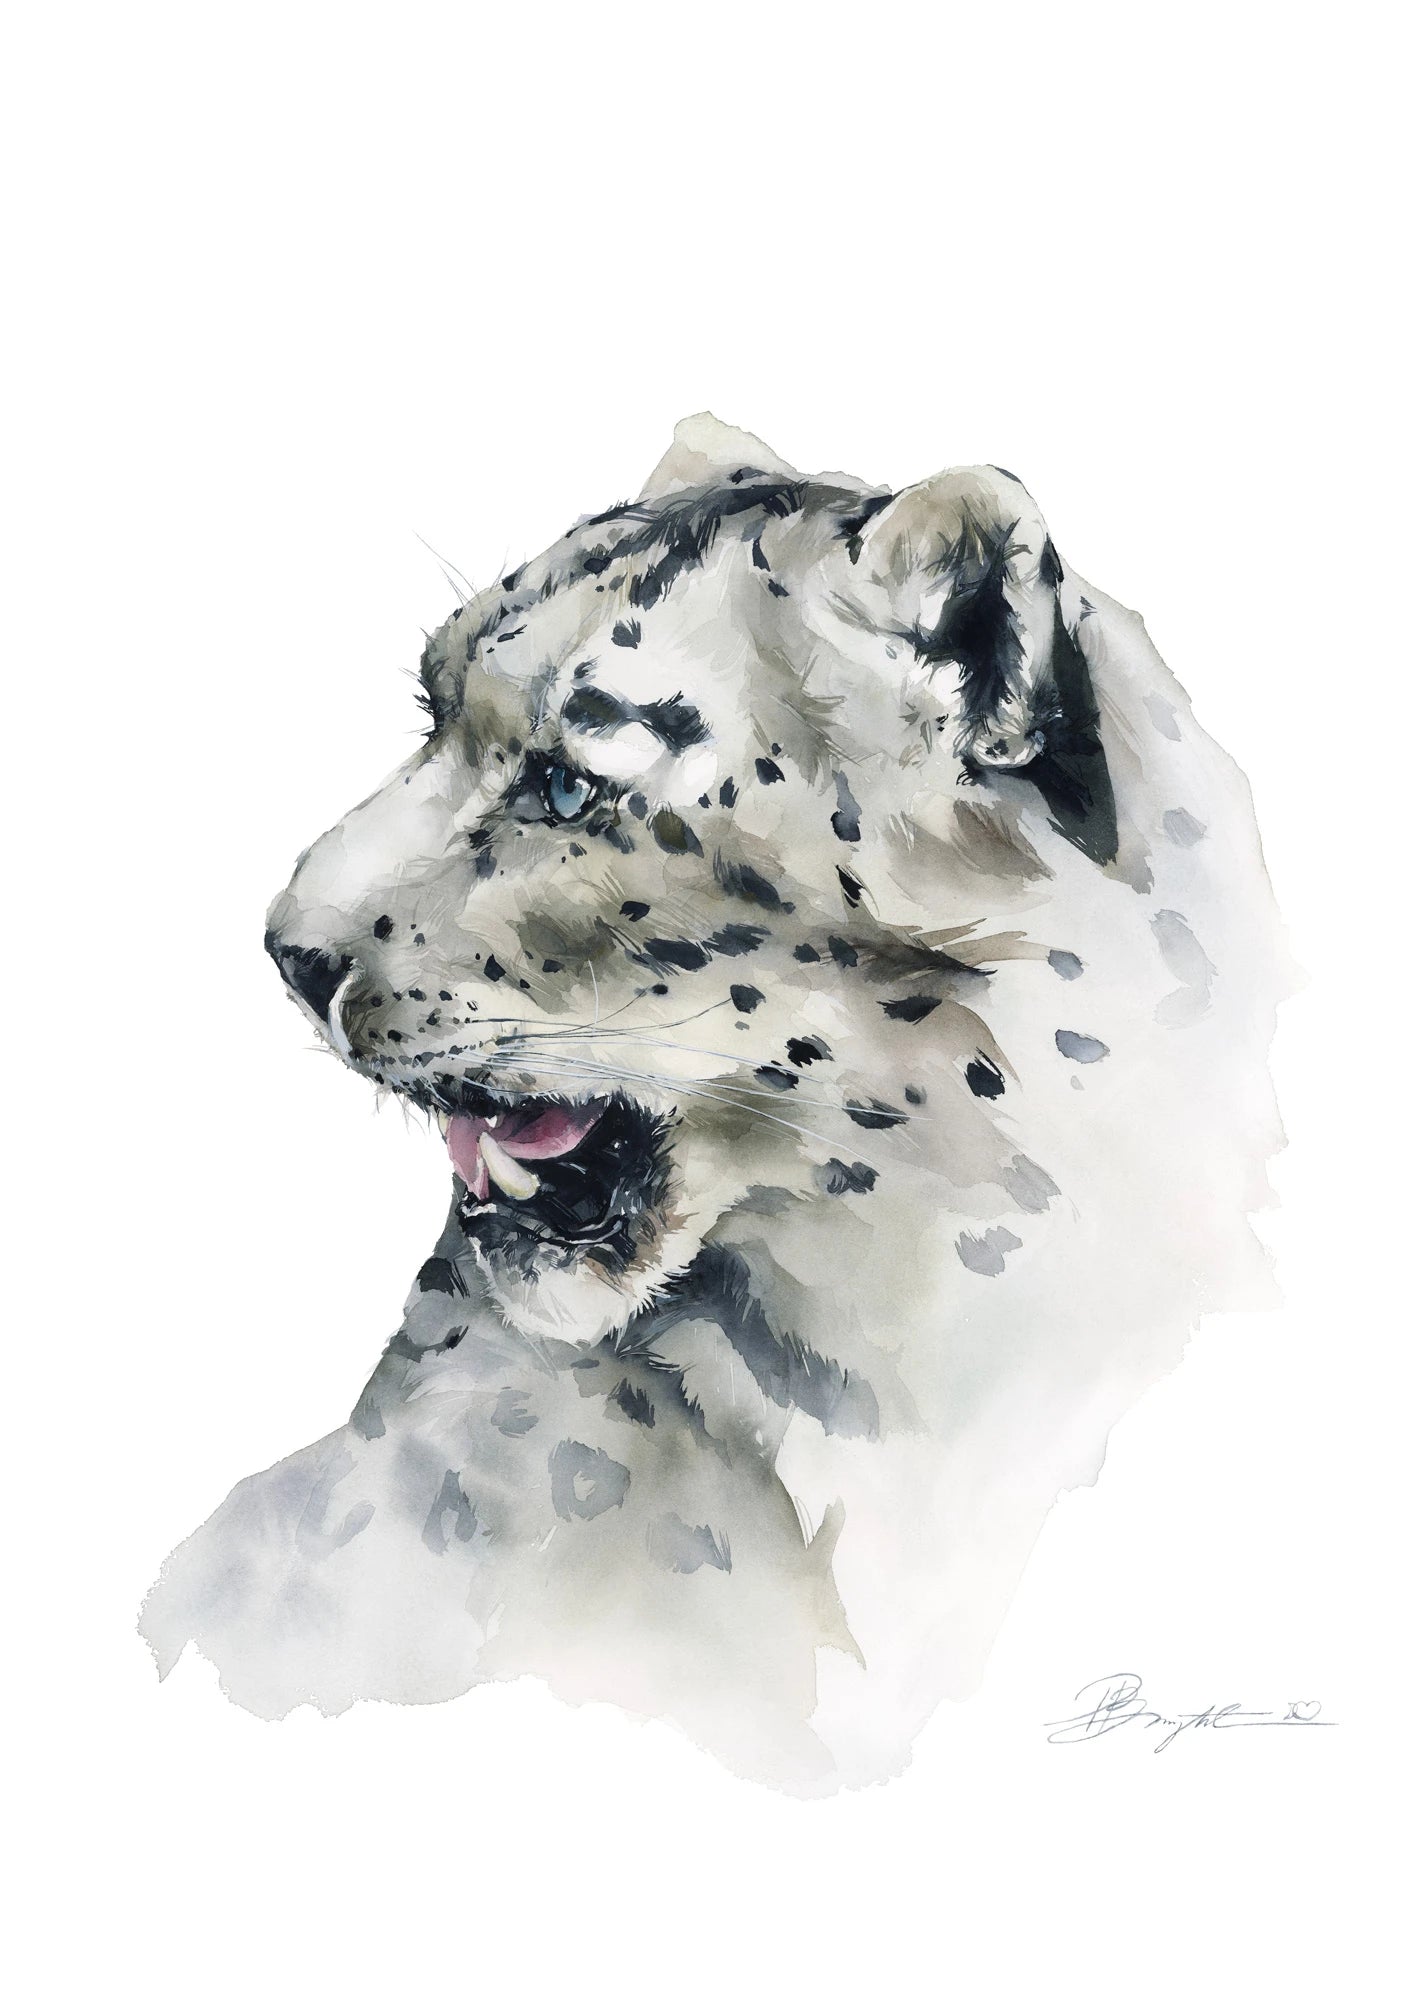 Snow leopard 2022 by polina bright